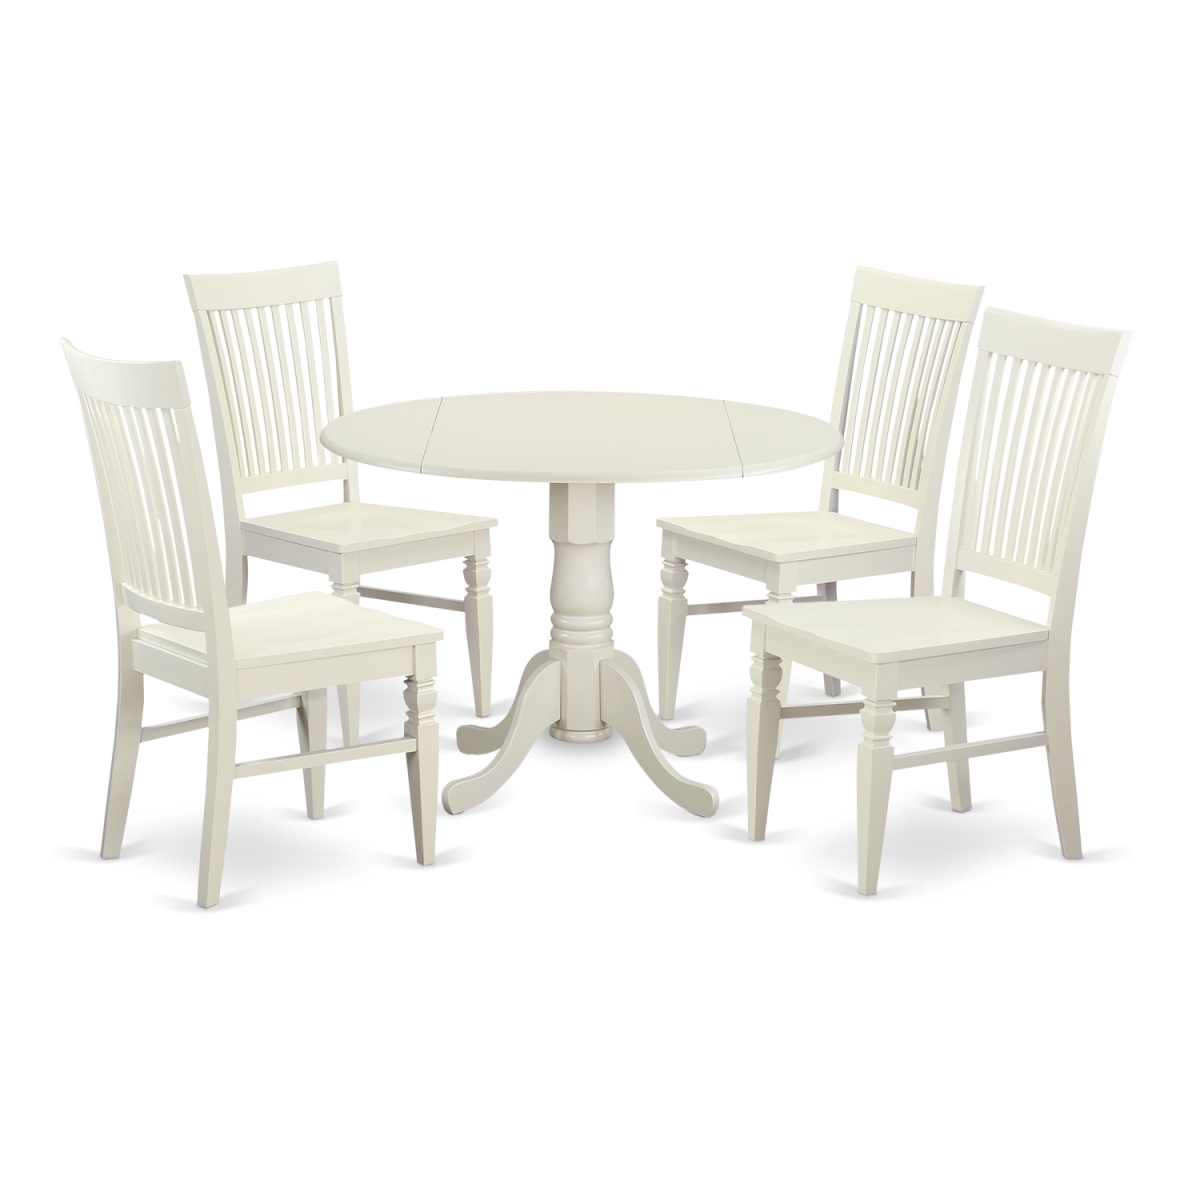 Picture of East West Furniture DLWE5-WHI-W Kitchen Table Set with 4 Kitchen Table & 4 Chairs, Linen White - 5 Piece